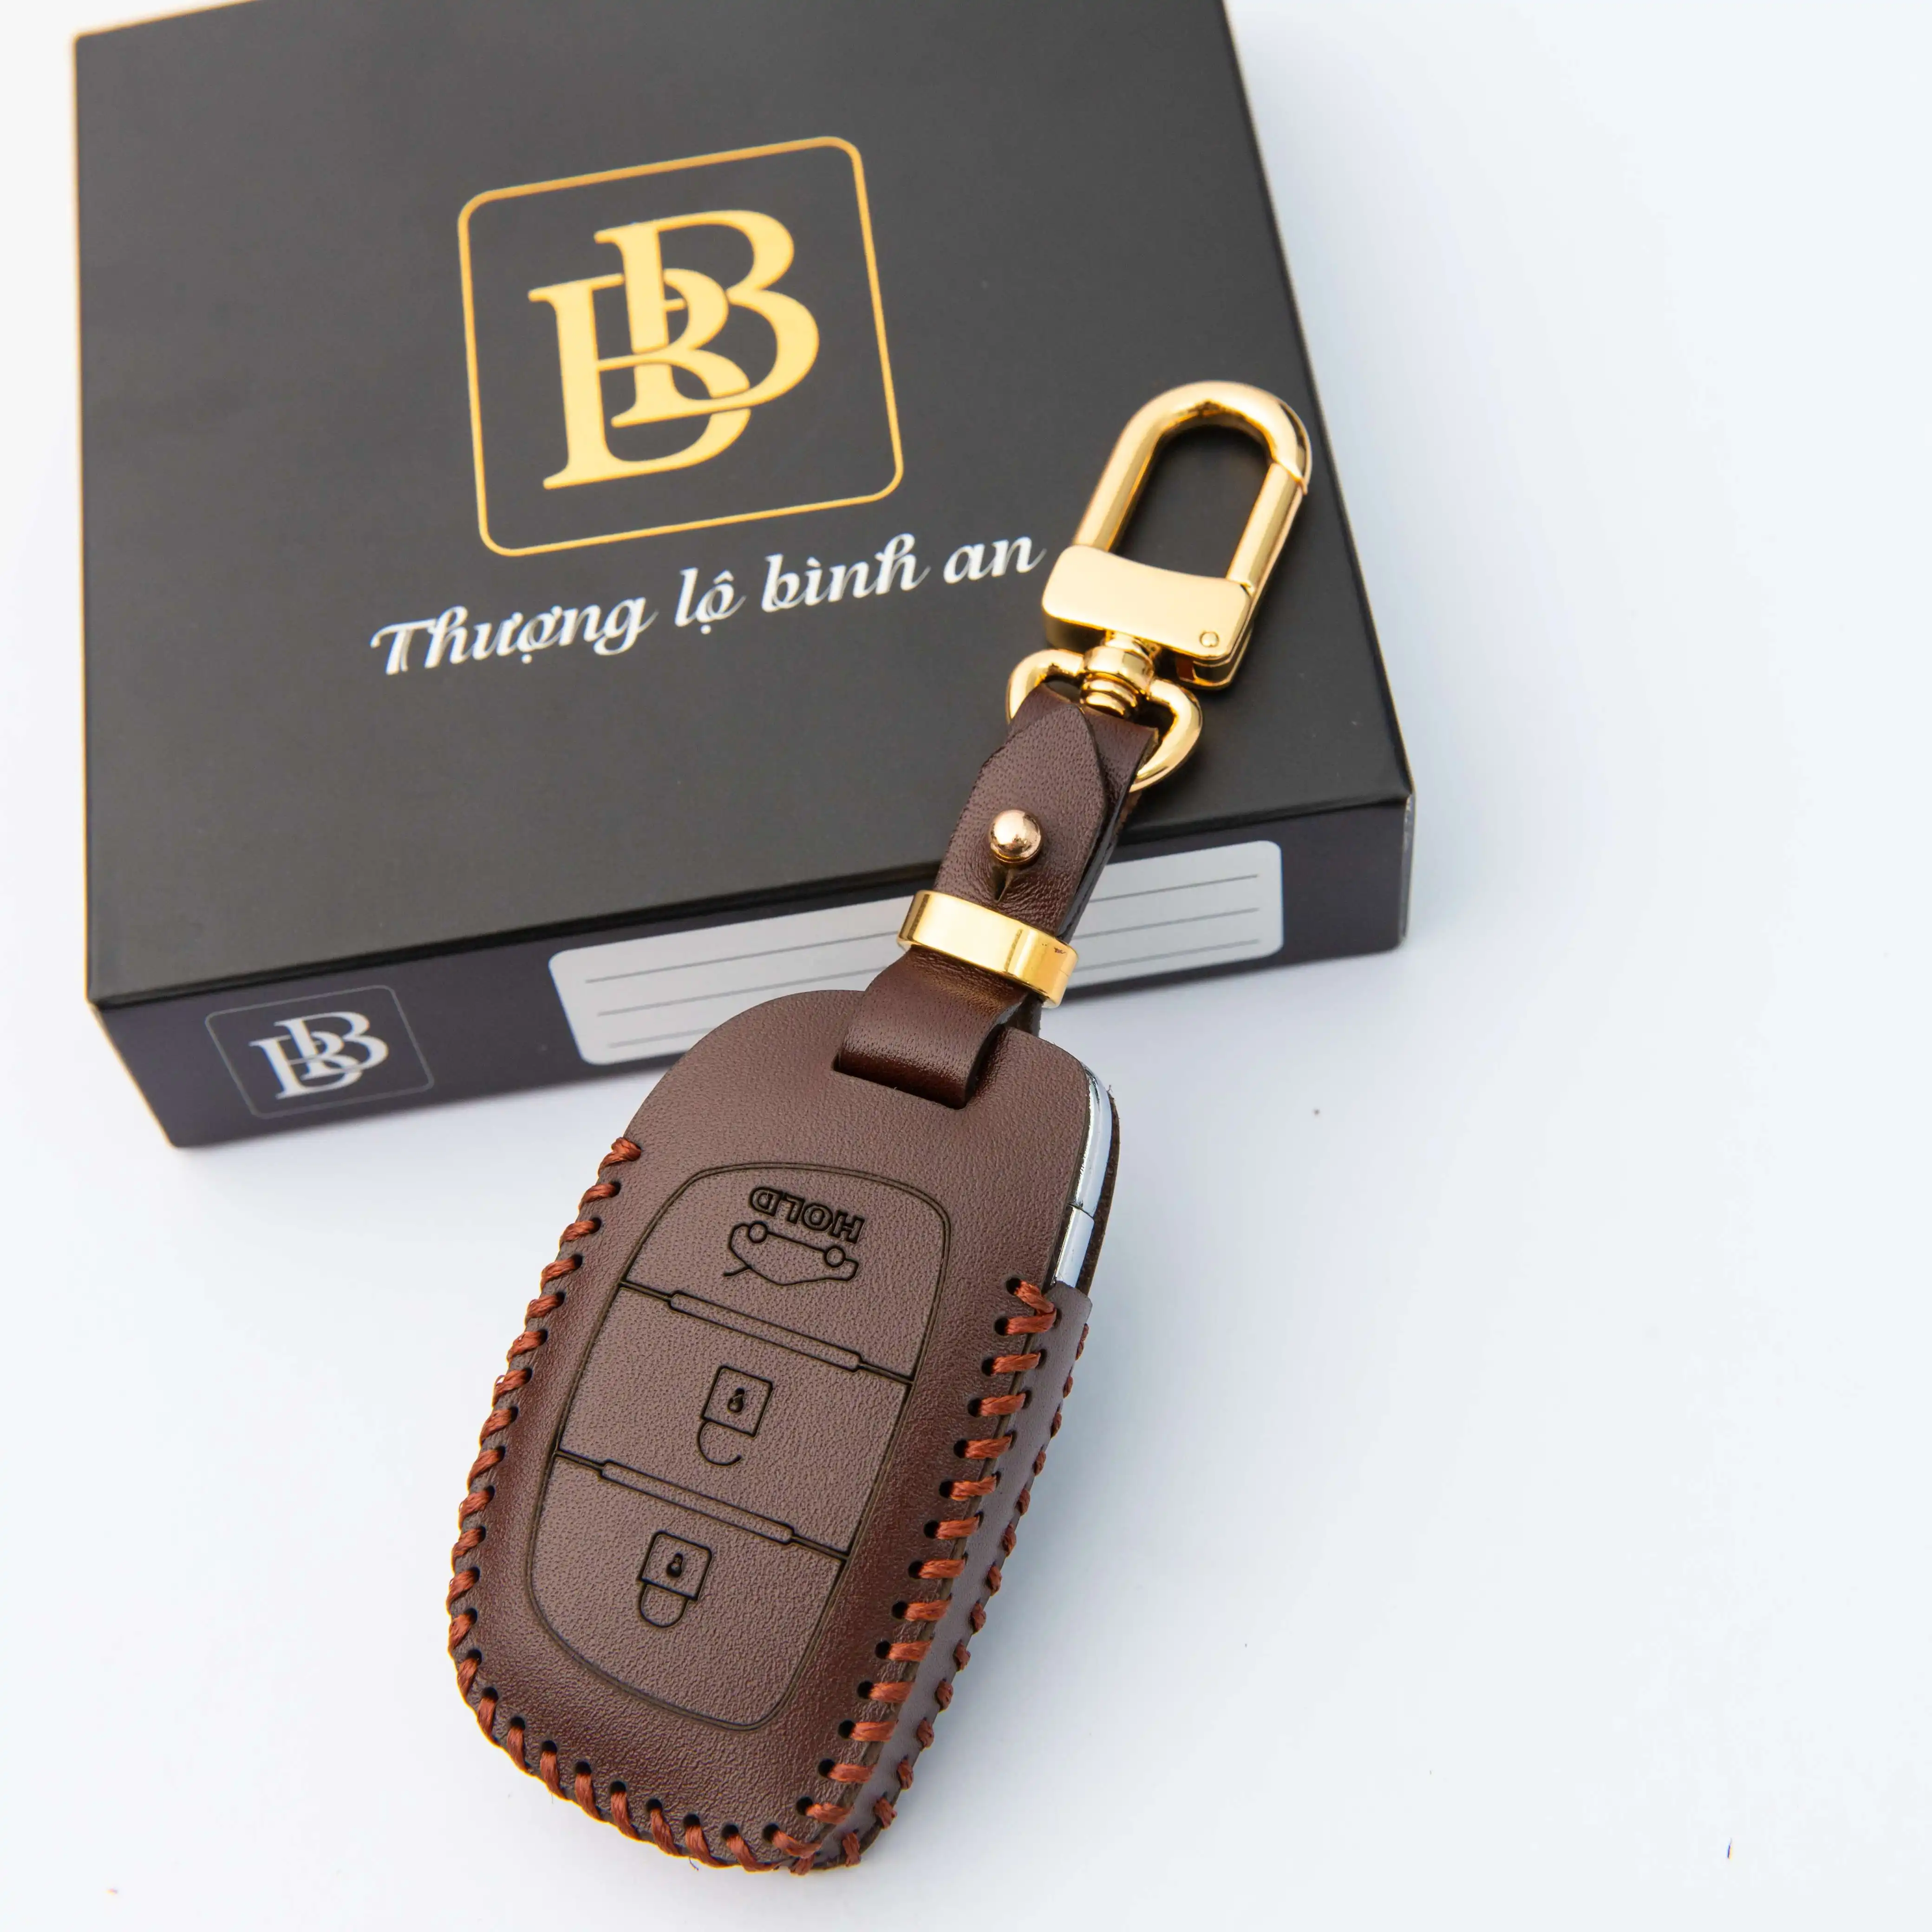 Huyndai I10 Tucson Elantra Leather Leather Key Case High Quality Waterproof Use For Key Car Pack In Box Vietnam Manufacturer